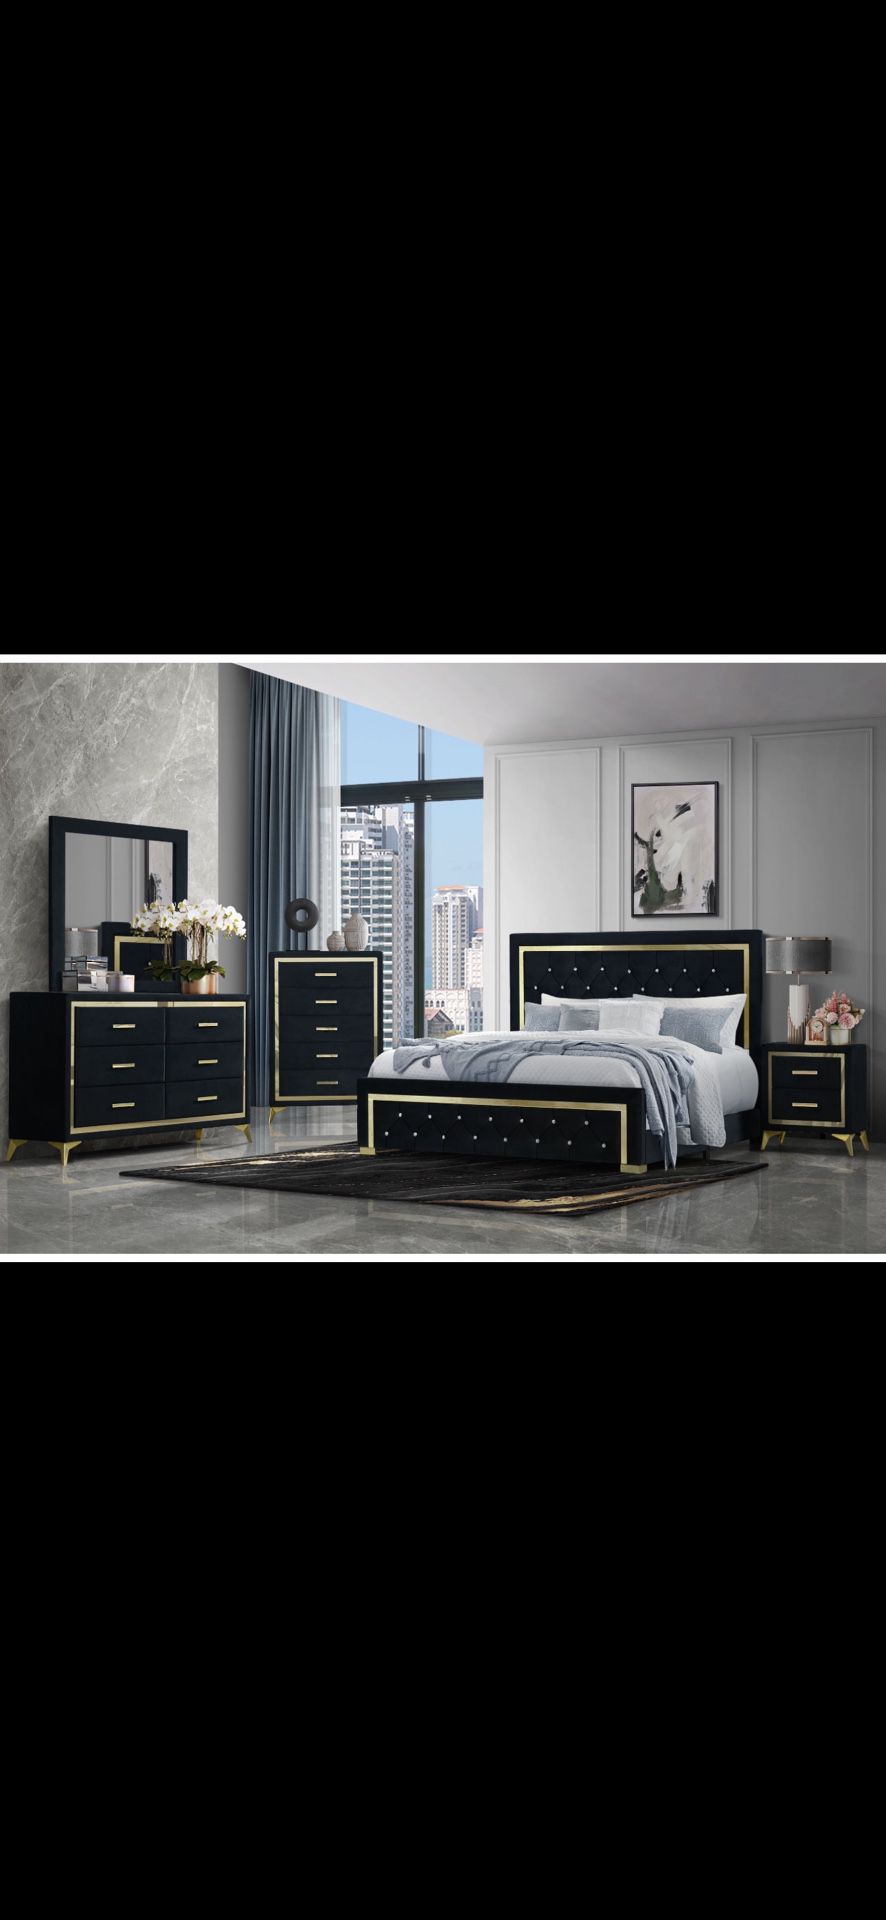 Brand New Complete Bedroom Set Im King Or Queen For $999